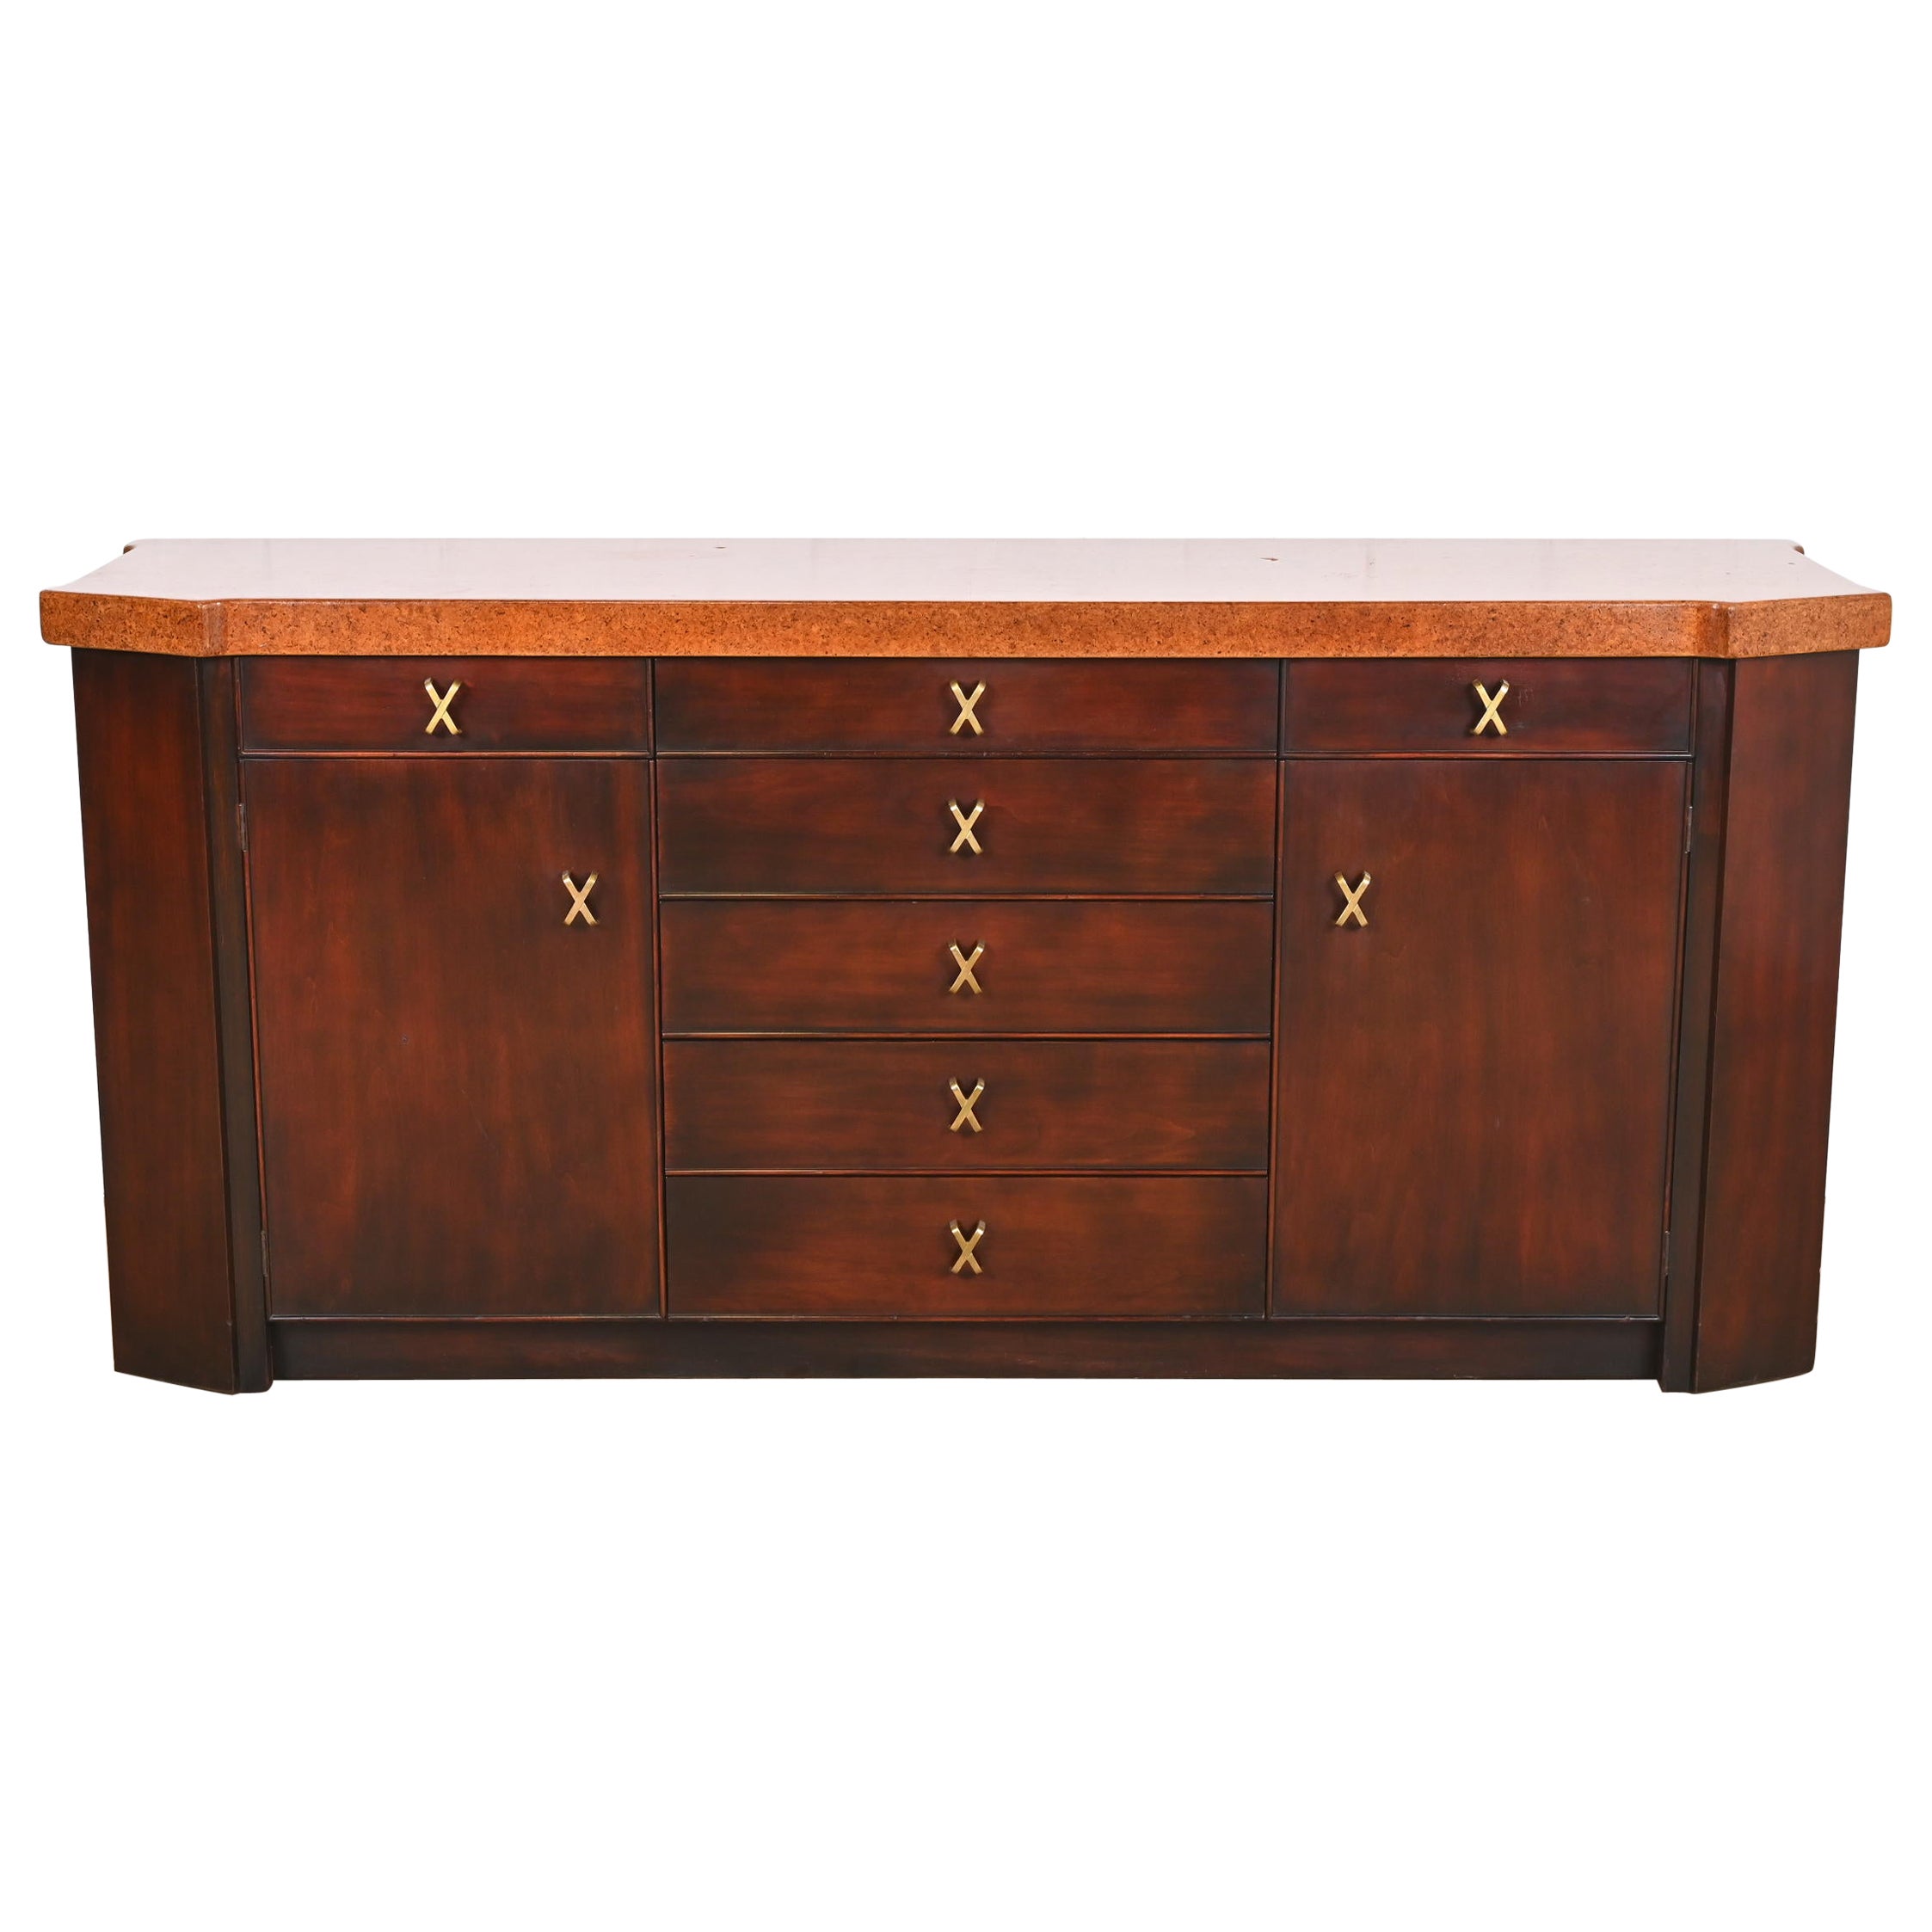 Paul Frankl for Johnson Furniture Mahogany Sideboard or Bar Cabinet, 1950s For Sale